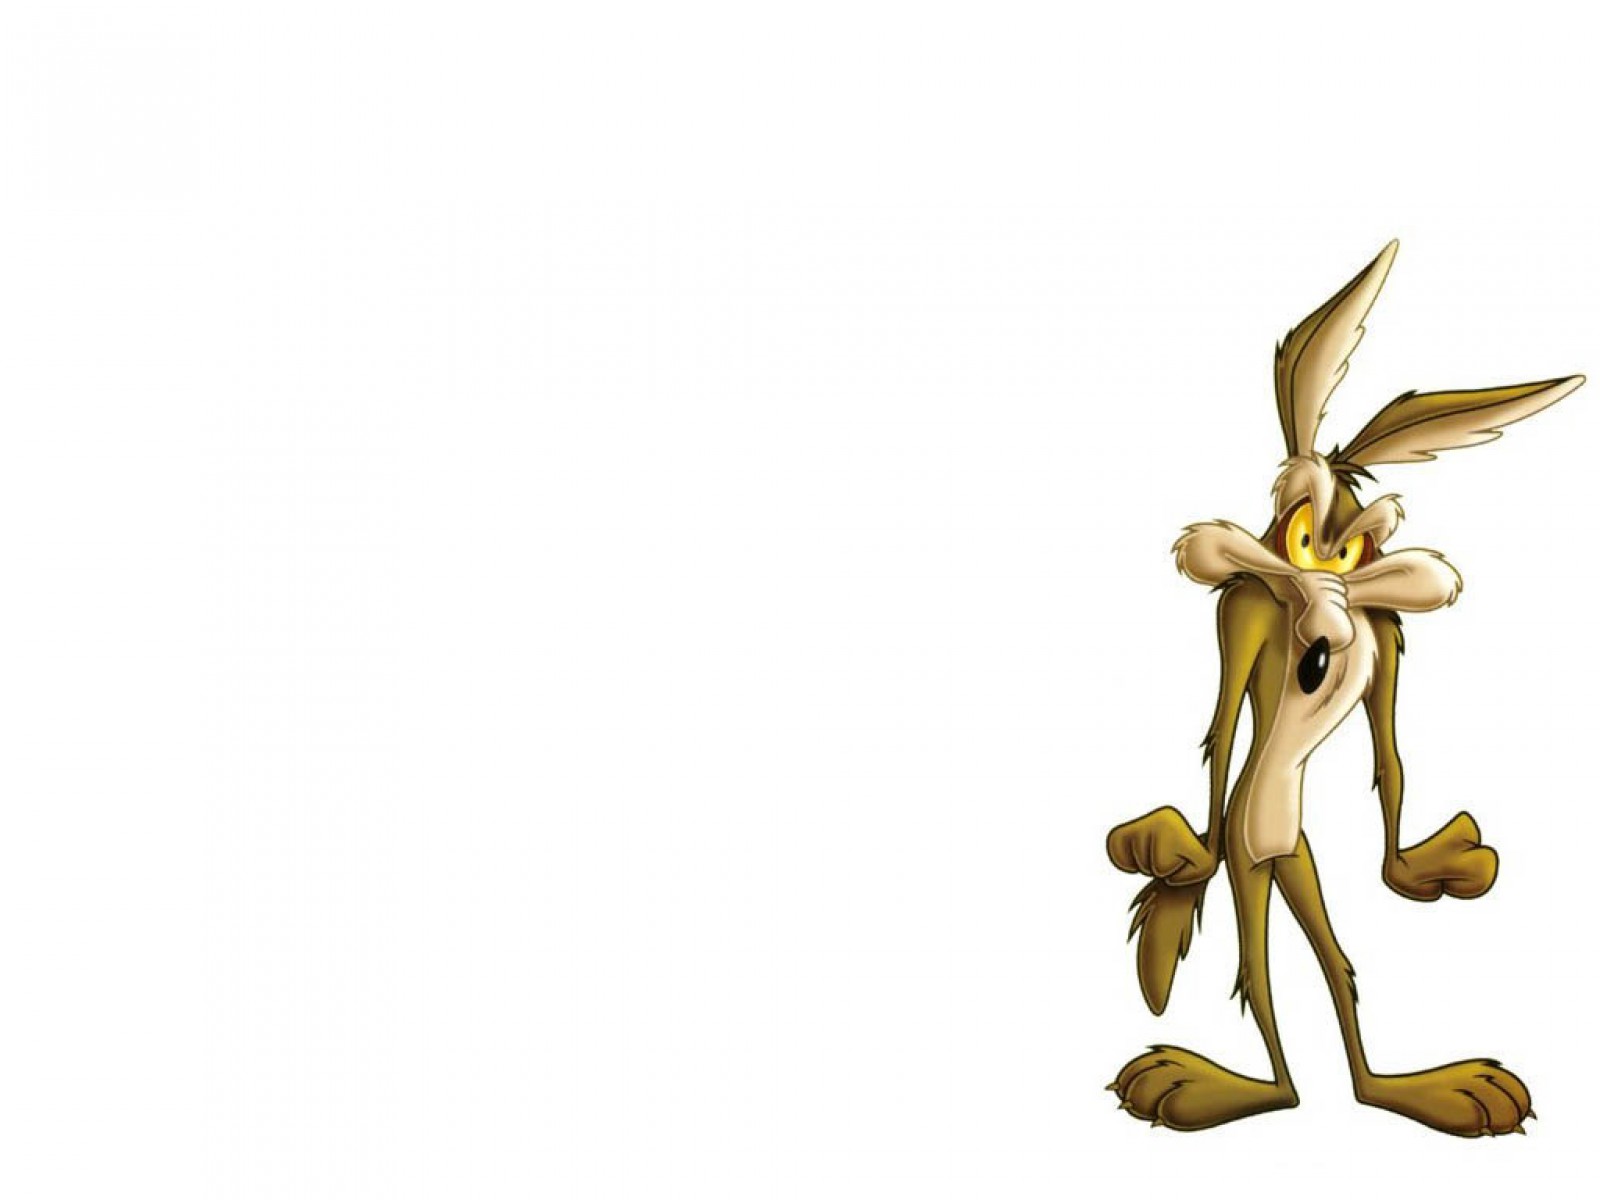 wile, E, Coyote, Looney Wallpaper